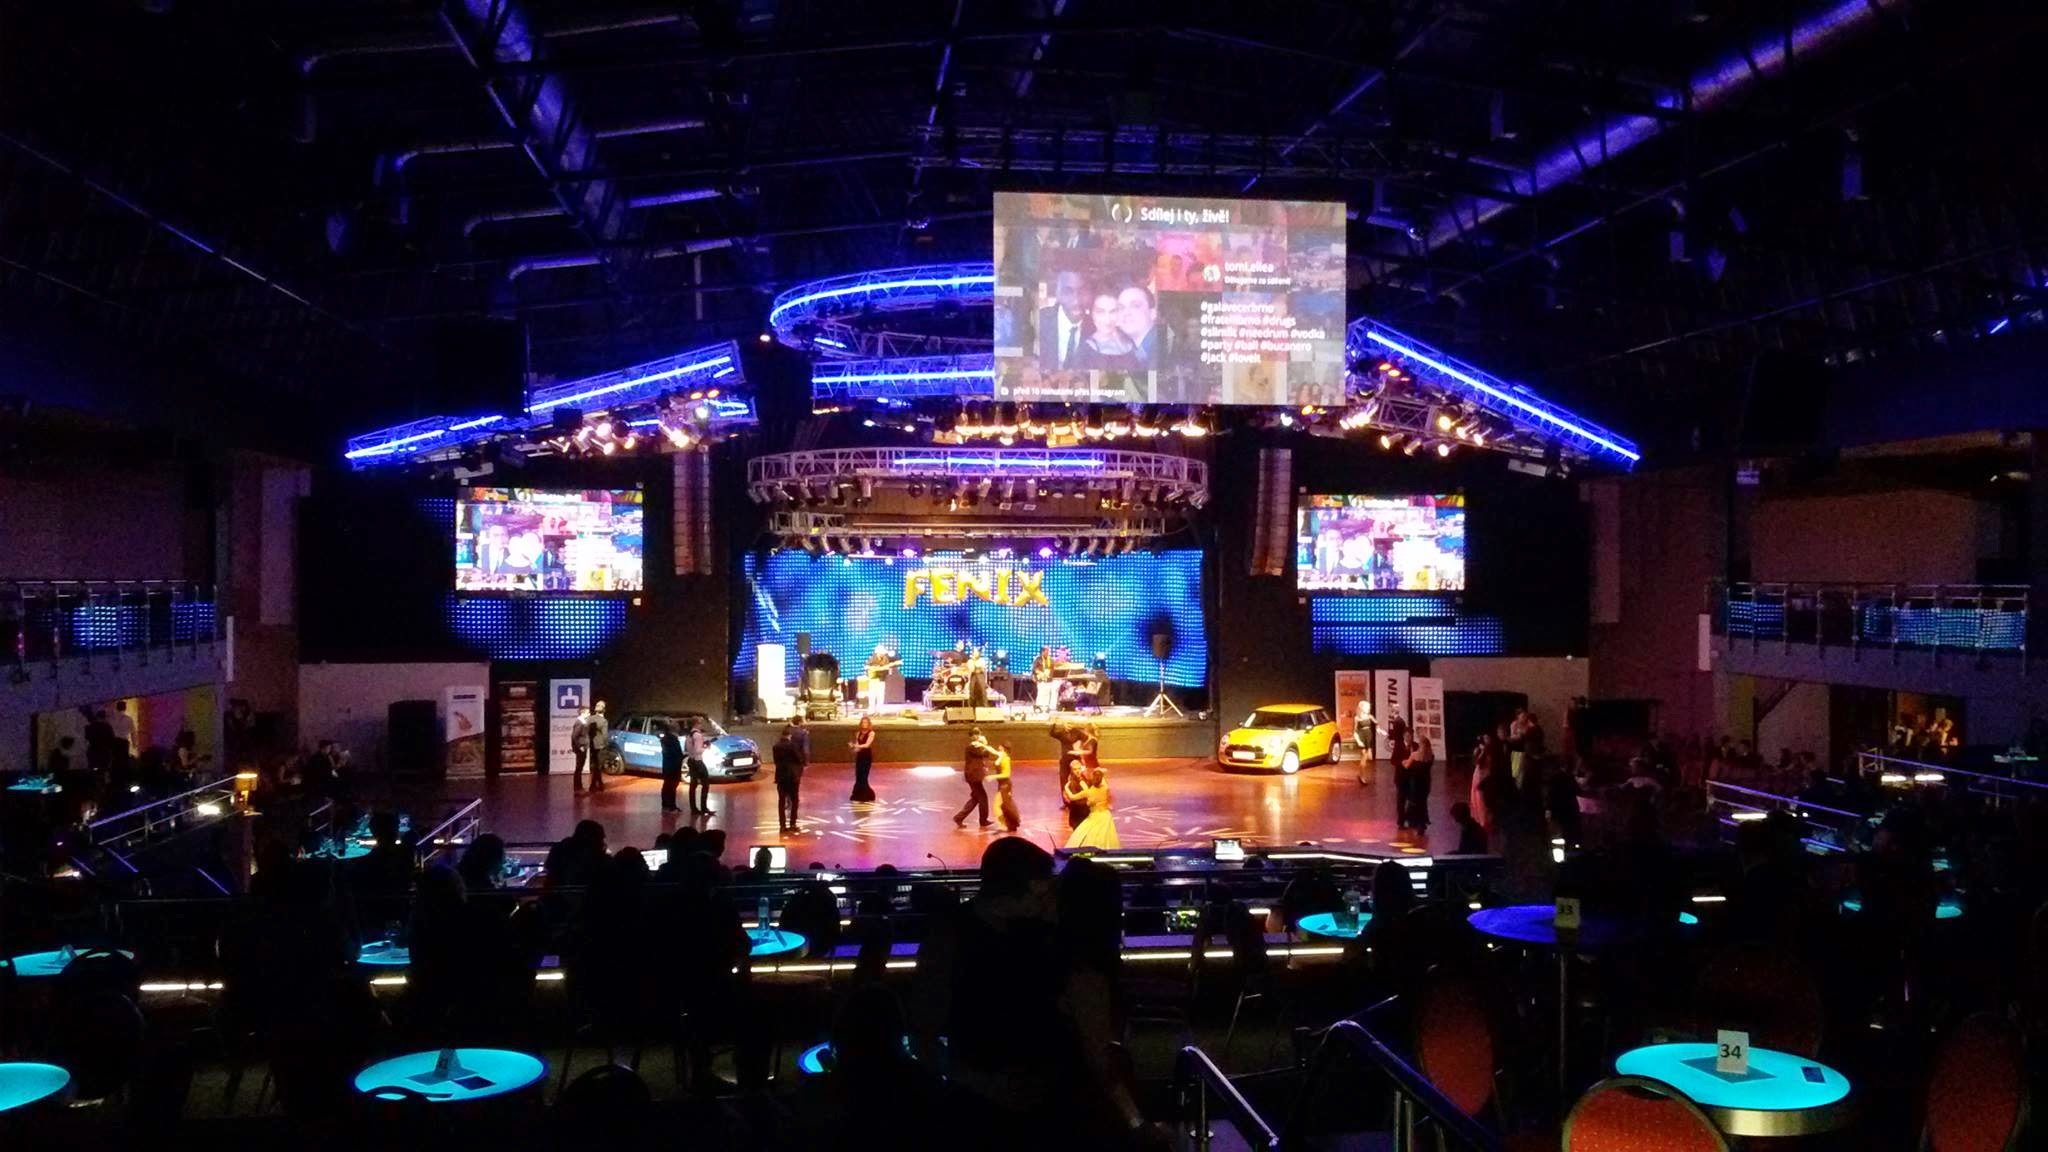 convention center with a stage full of large video displays